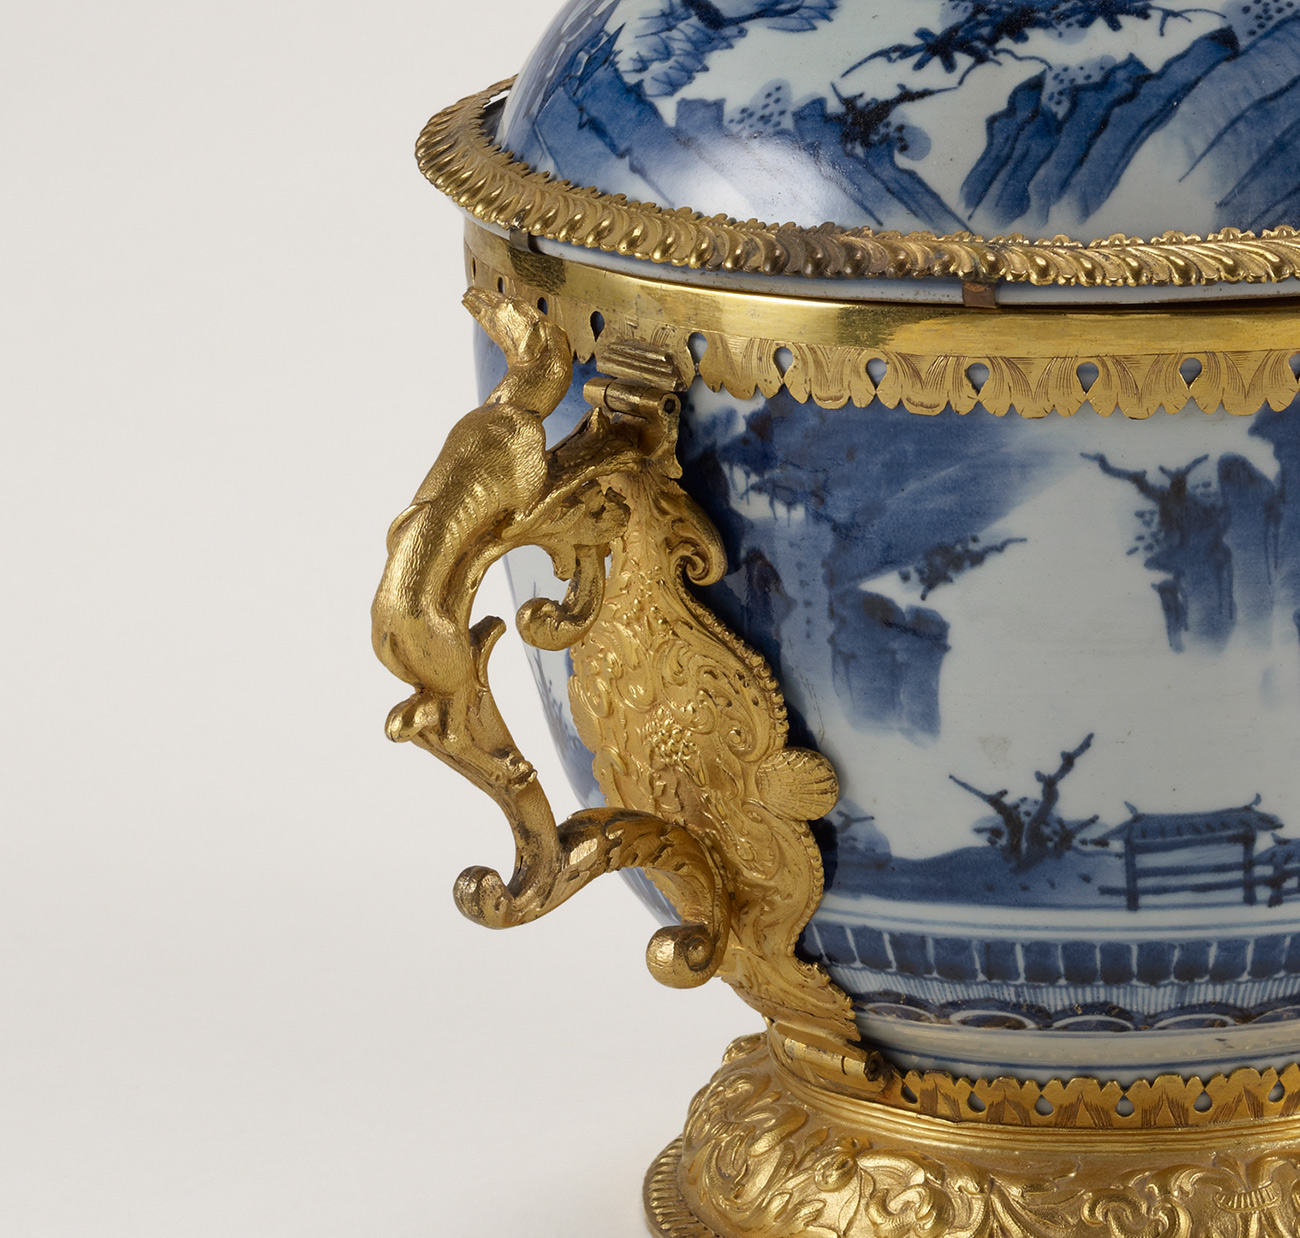 Detail of one of the gilt-bronze handles with a greyhound on one of the bowls at the Getty. One of a pair of lidded bowls (detail), late seventeenth century. Japanese porcelain and English gilt-bronze mounts, 13 9/16 x 15 x 10 1/16 in. The J. Paul Getty Museum, 85.DI.178.1. Digital image courtesy of the Getty’s Open Content Program